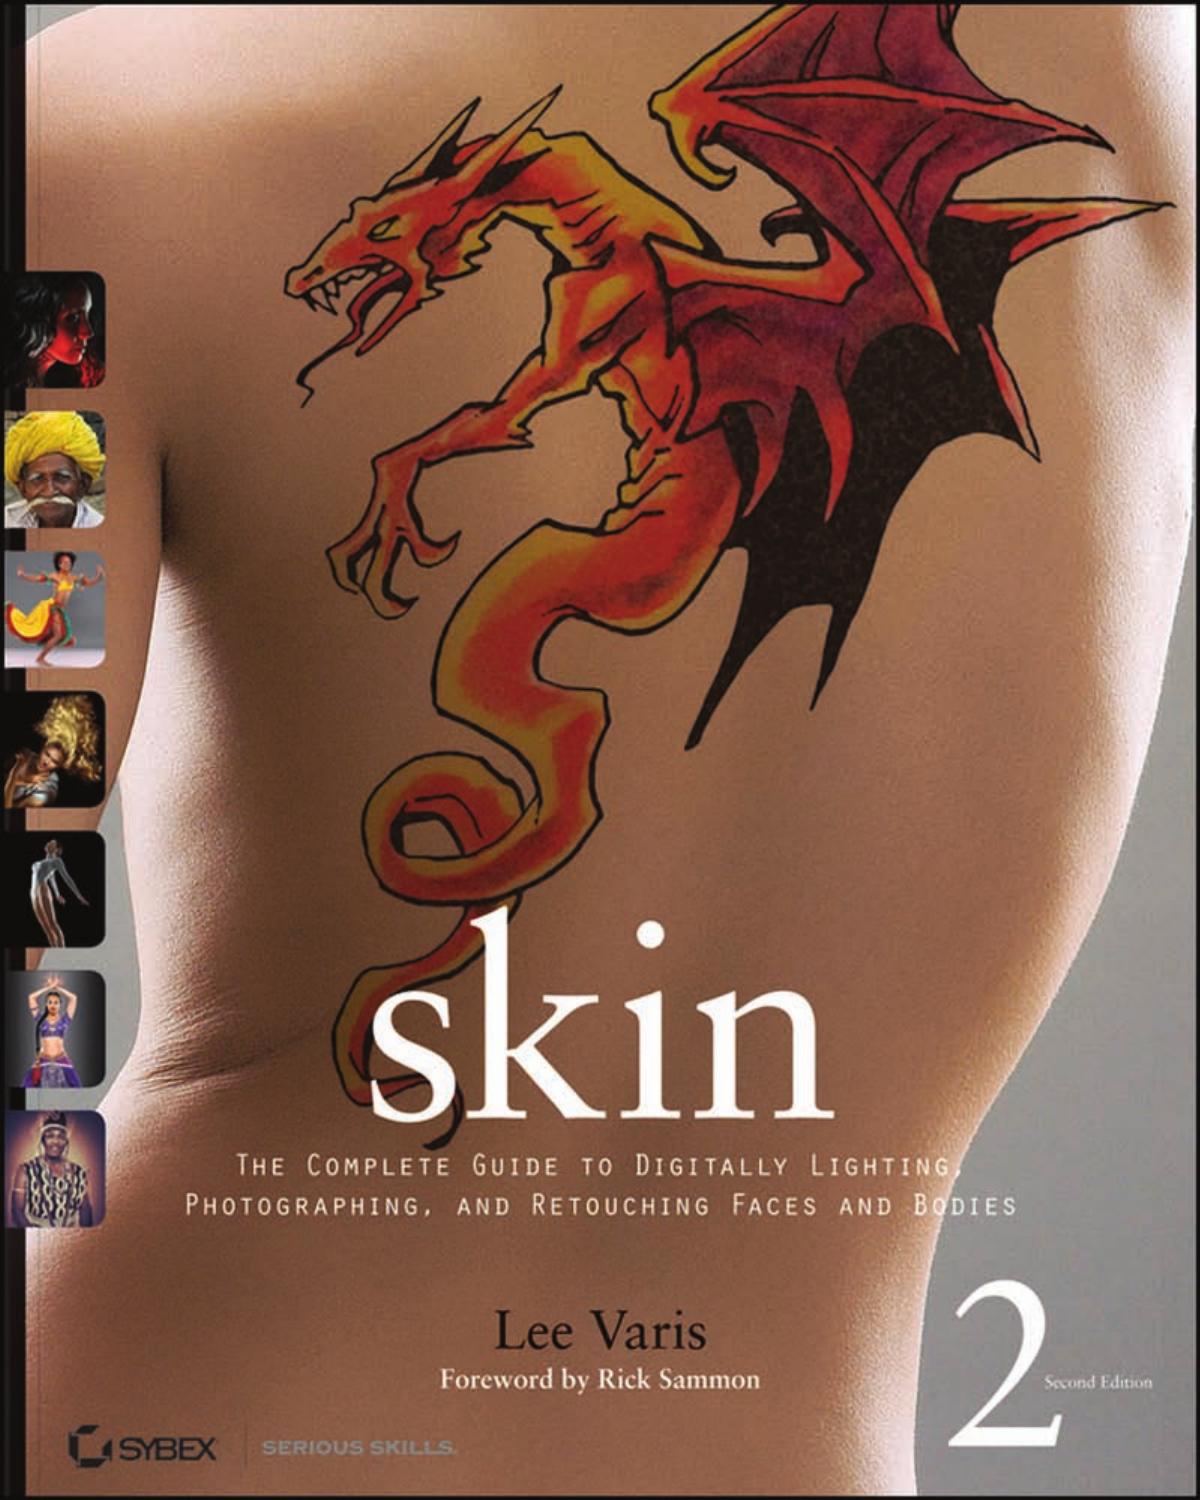 Skin: the Complete Guide to Digitally Lighting, Photographing, and Retouching Faces and Bodies by Lee Varis